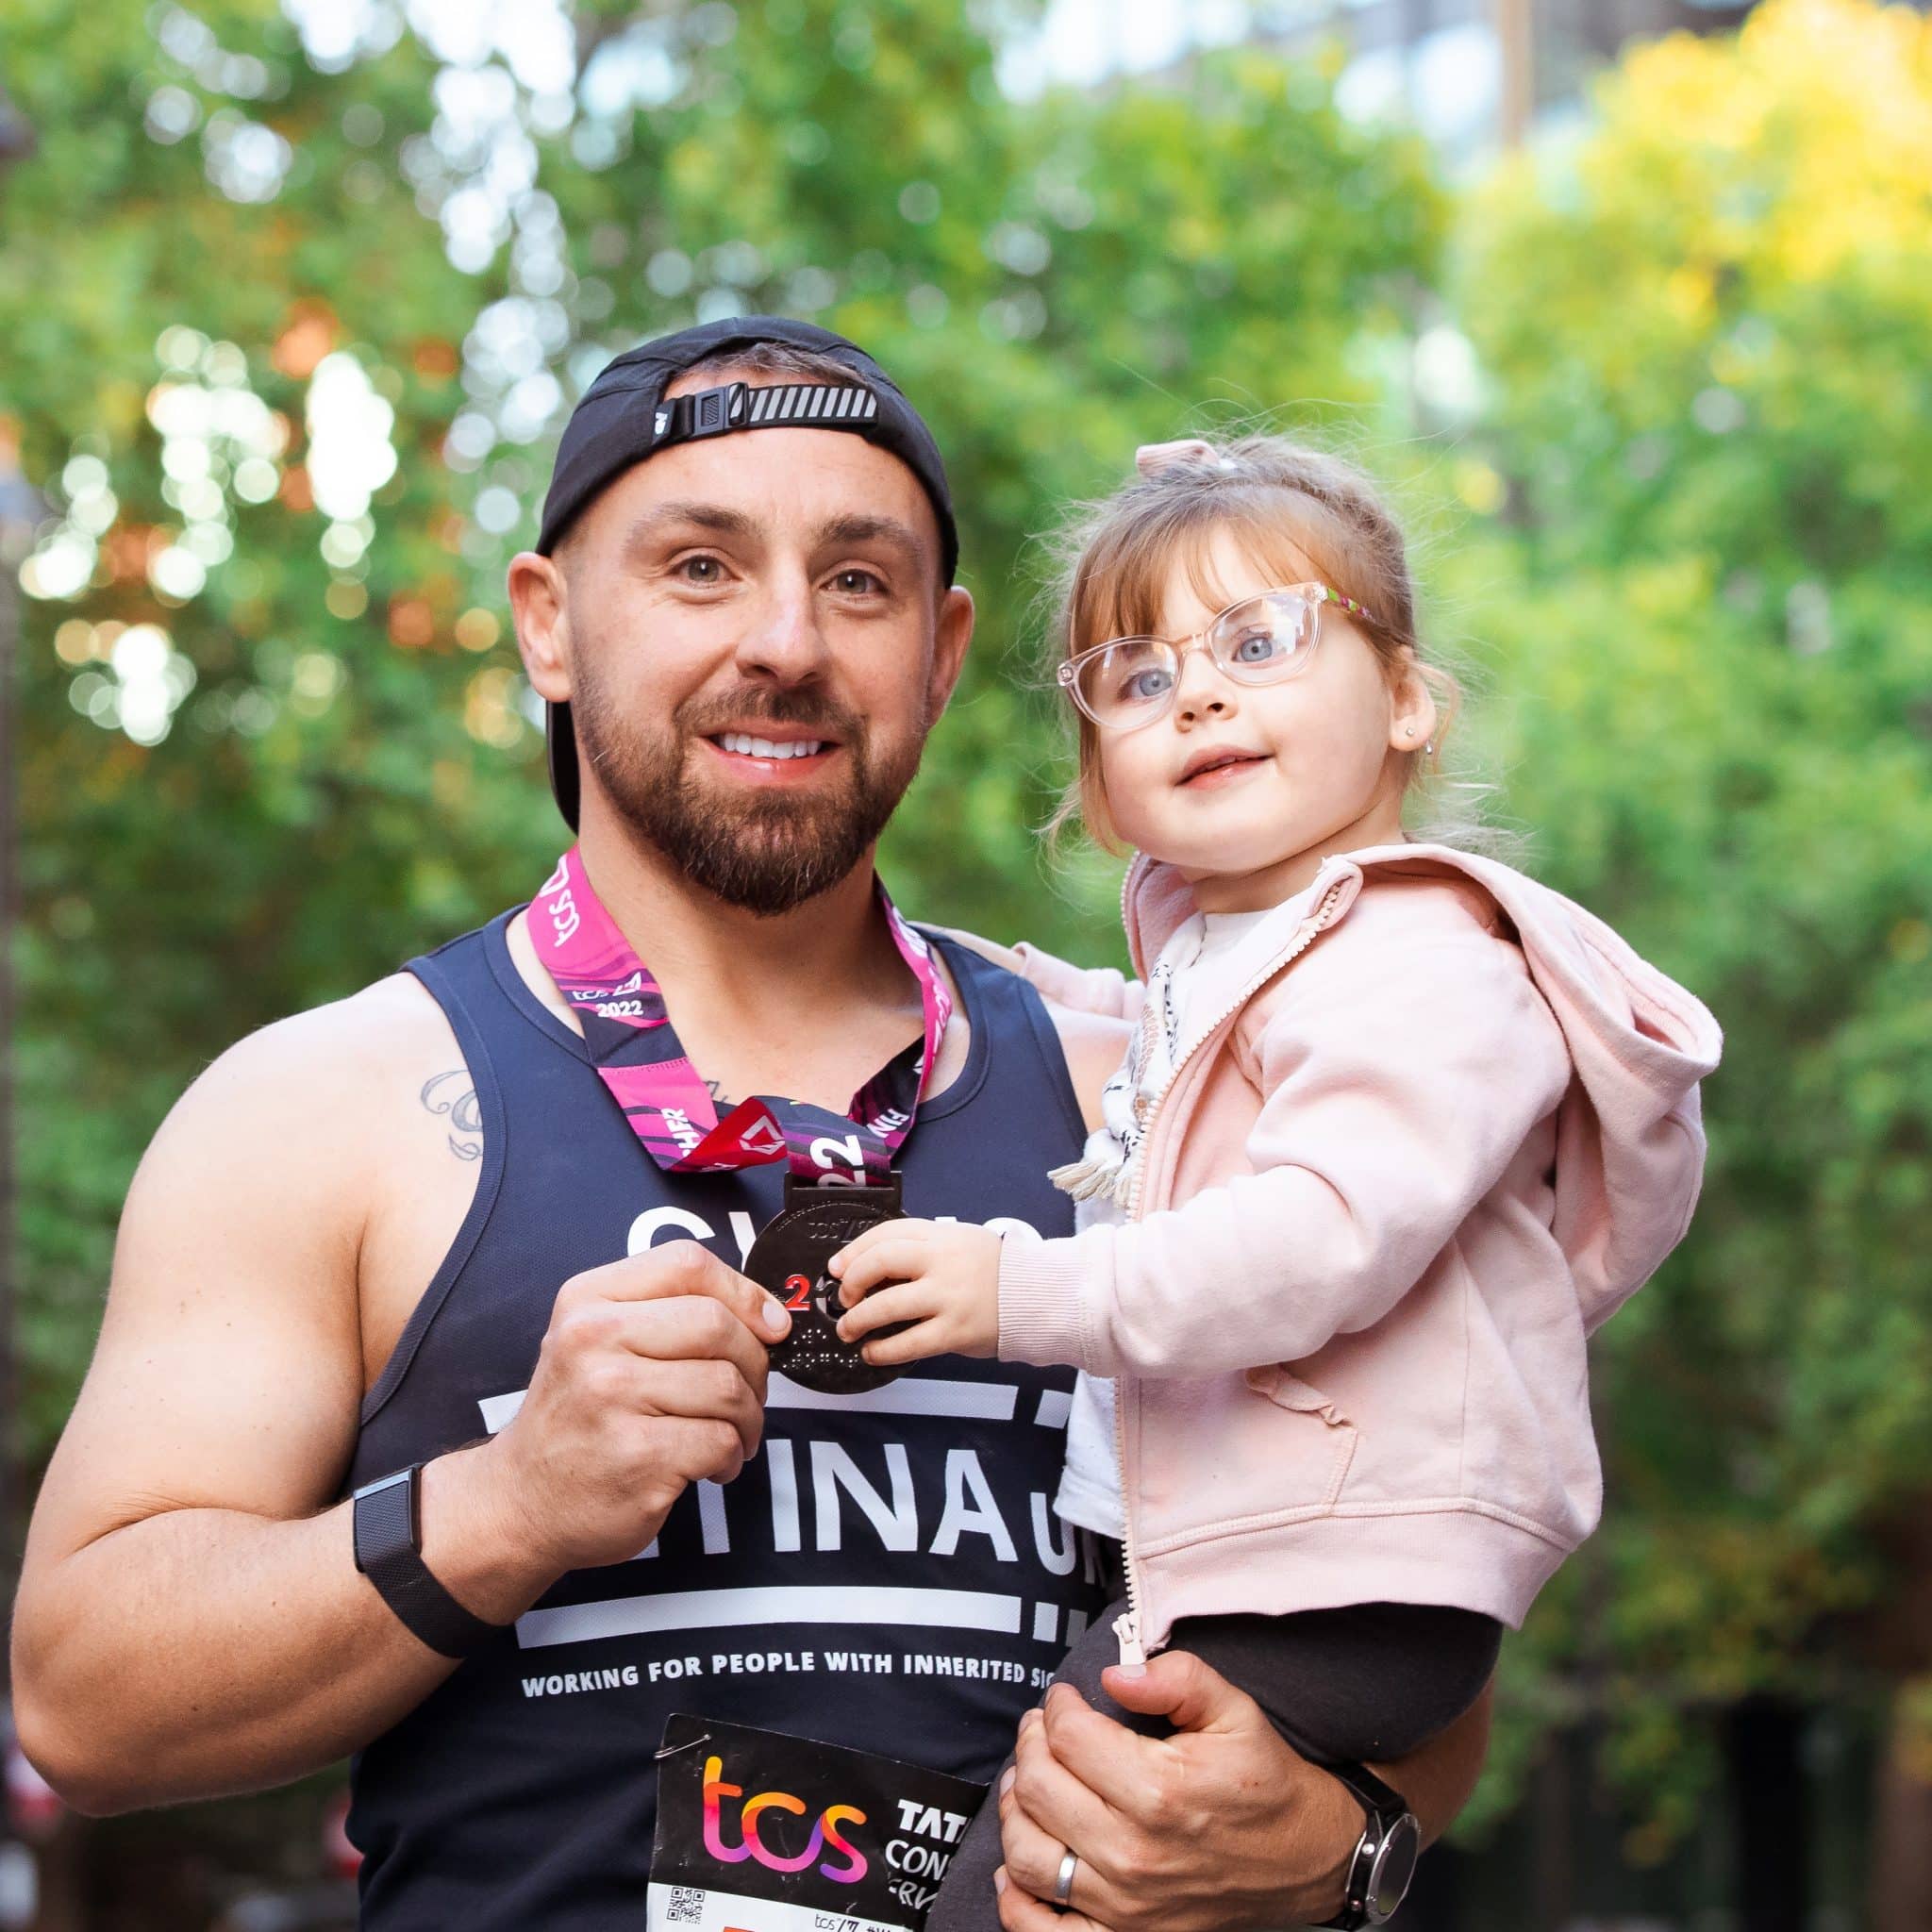 Image shows a man wearing a blue Retina UK running vest and a London Marathon medal. He is holding his young daughter.